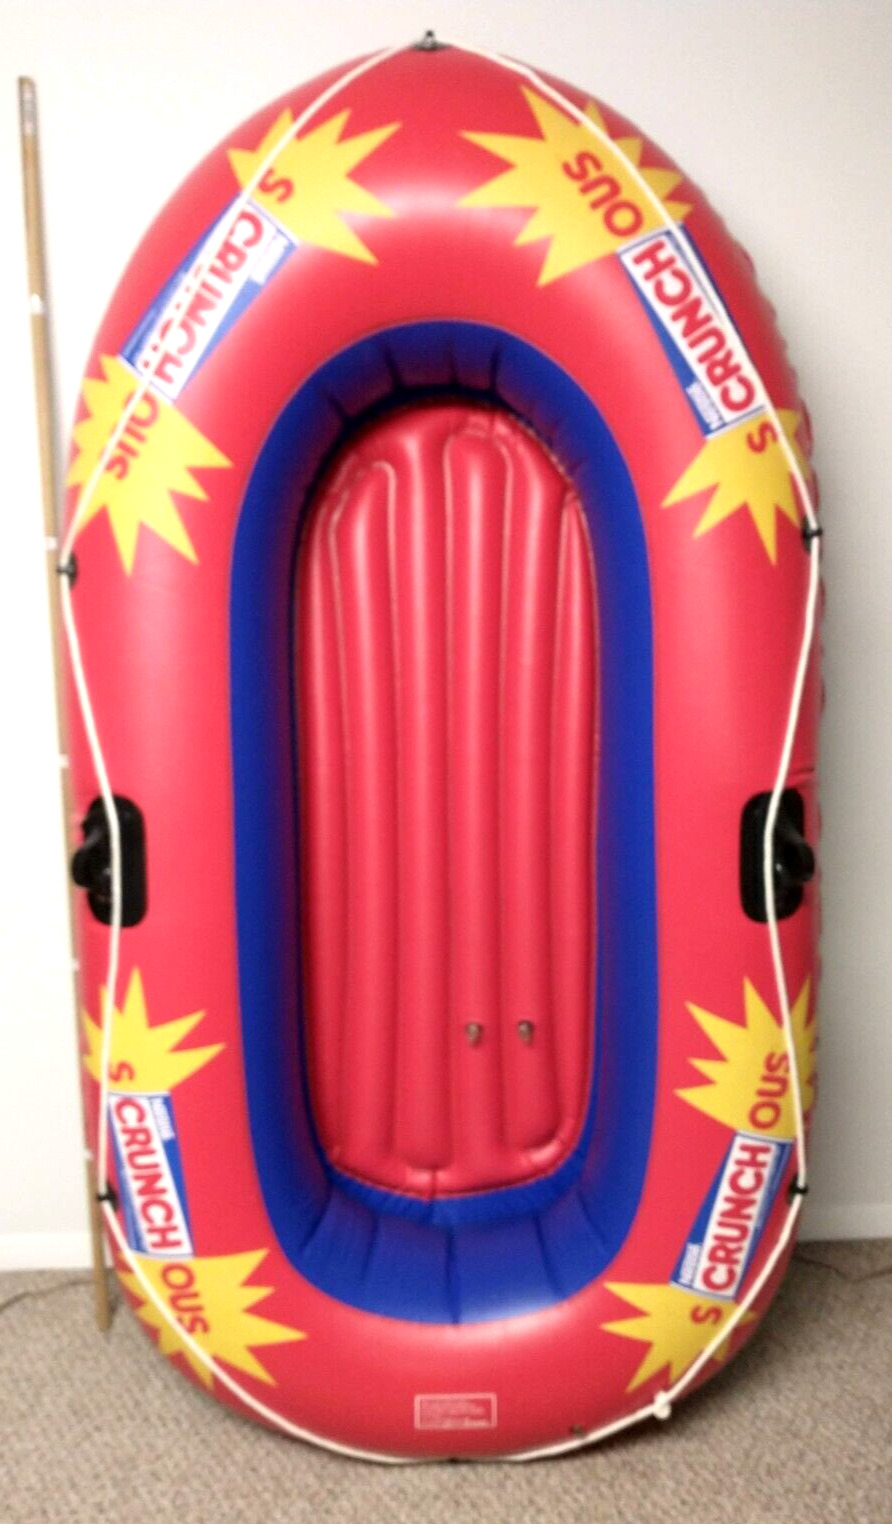 Sevylor Nestle Crunch 2 Person Inflatable Boat Raft Ad 1989 6+ Feet Tested